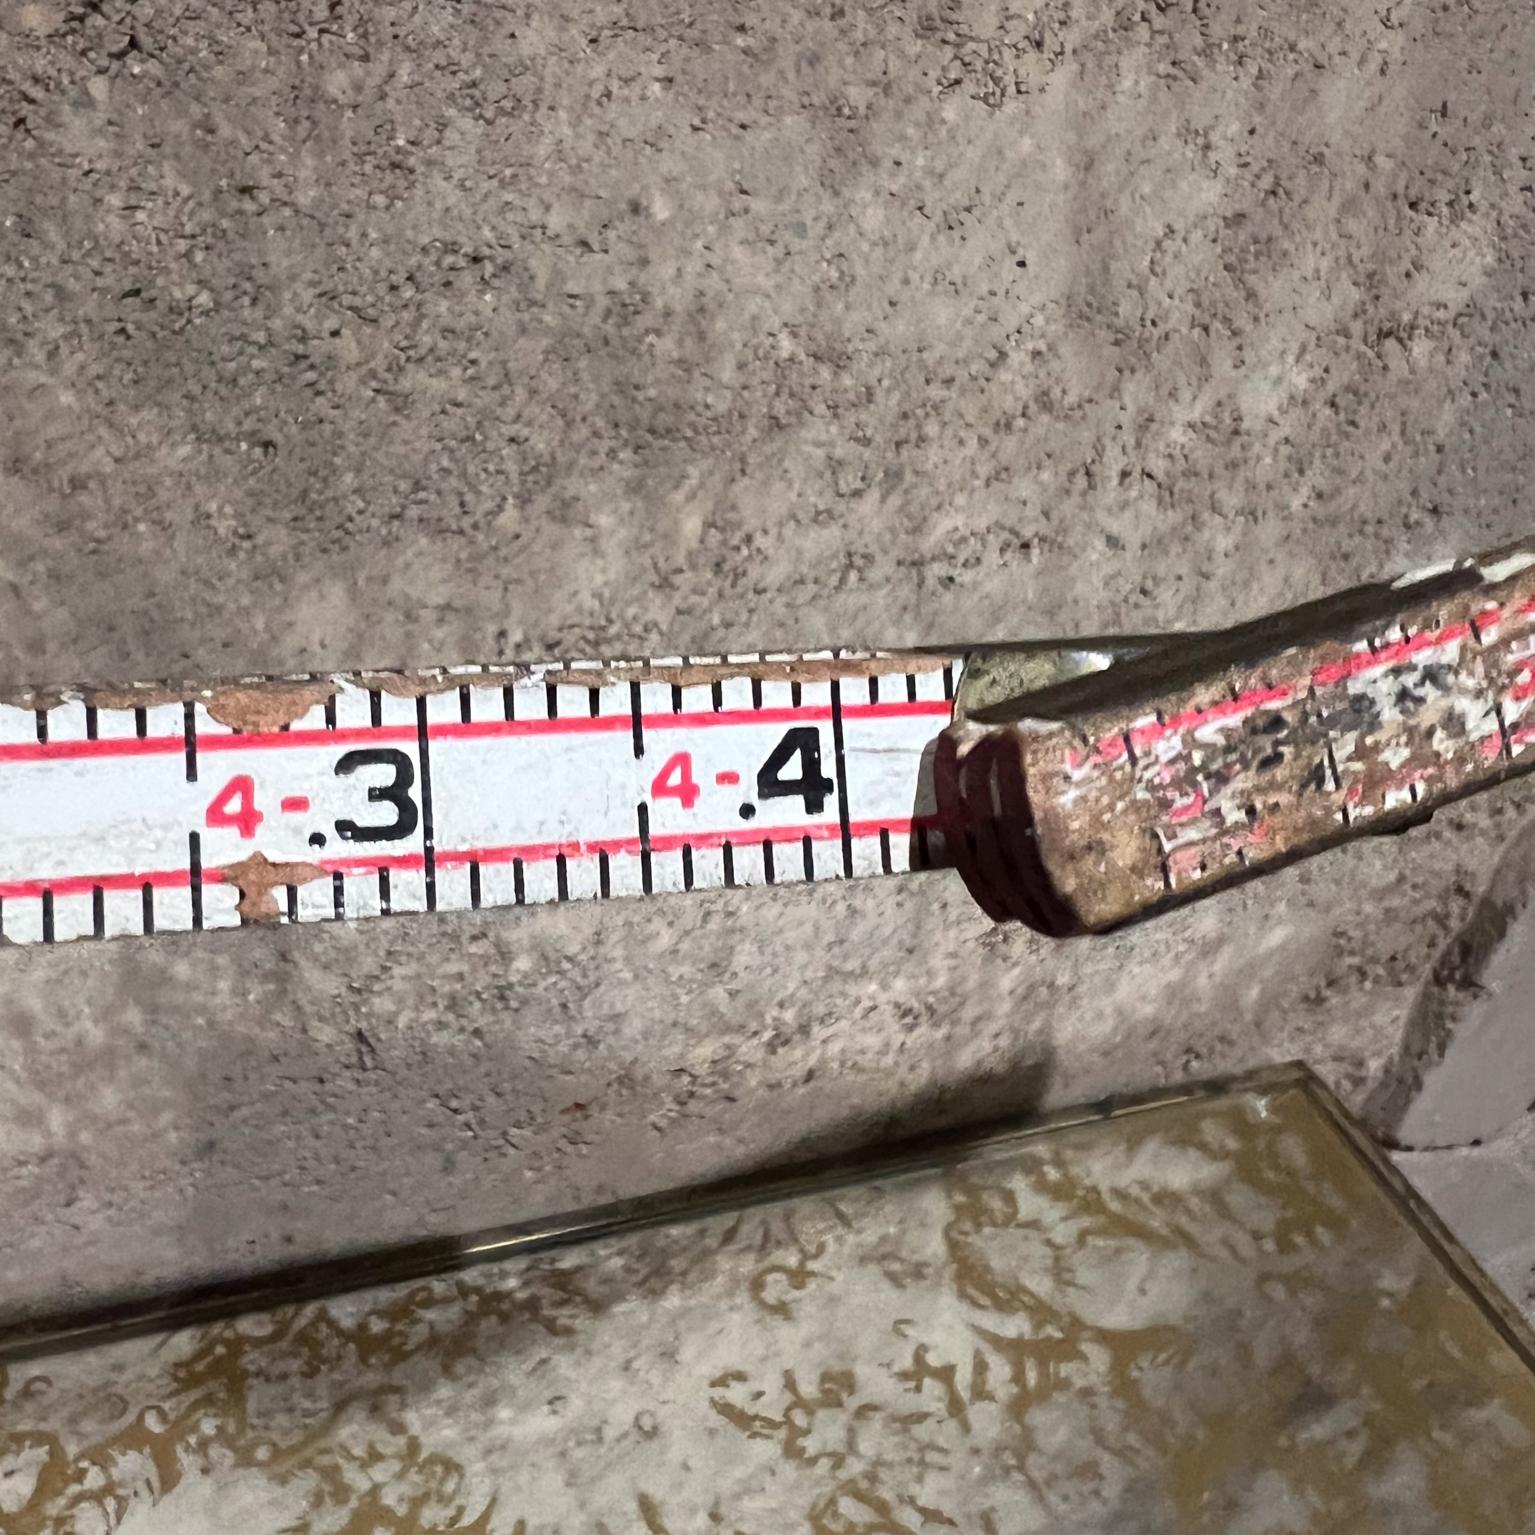 Antique Extension Ruler Wood Folding Measuring Tape In Fair Condition For Sale In Chula Vista, CA